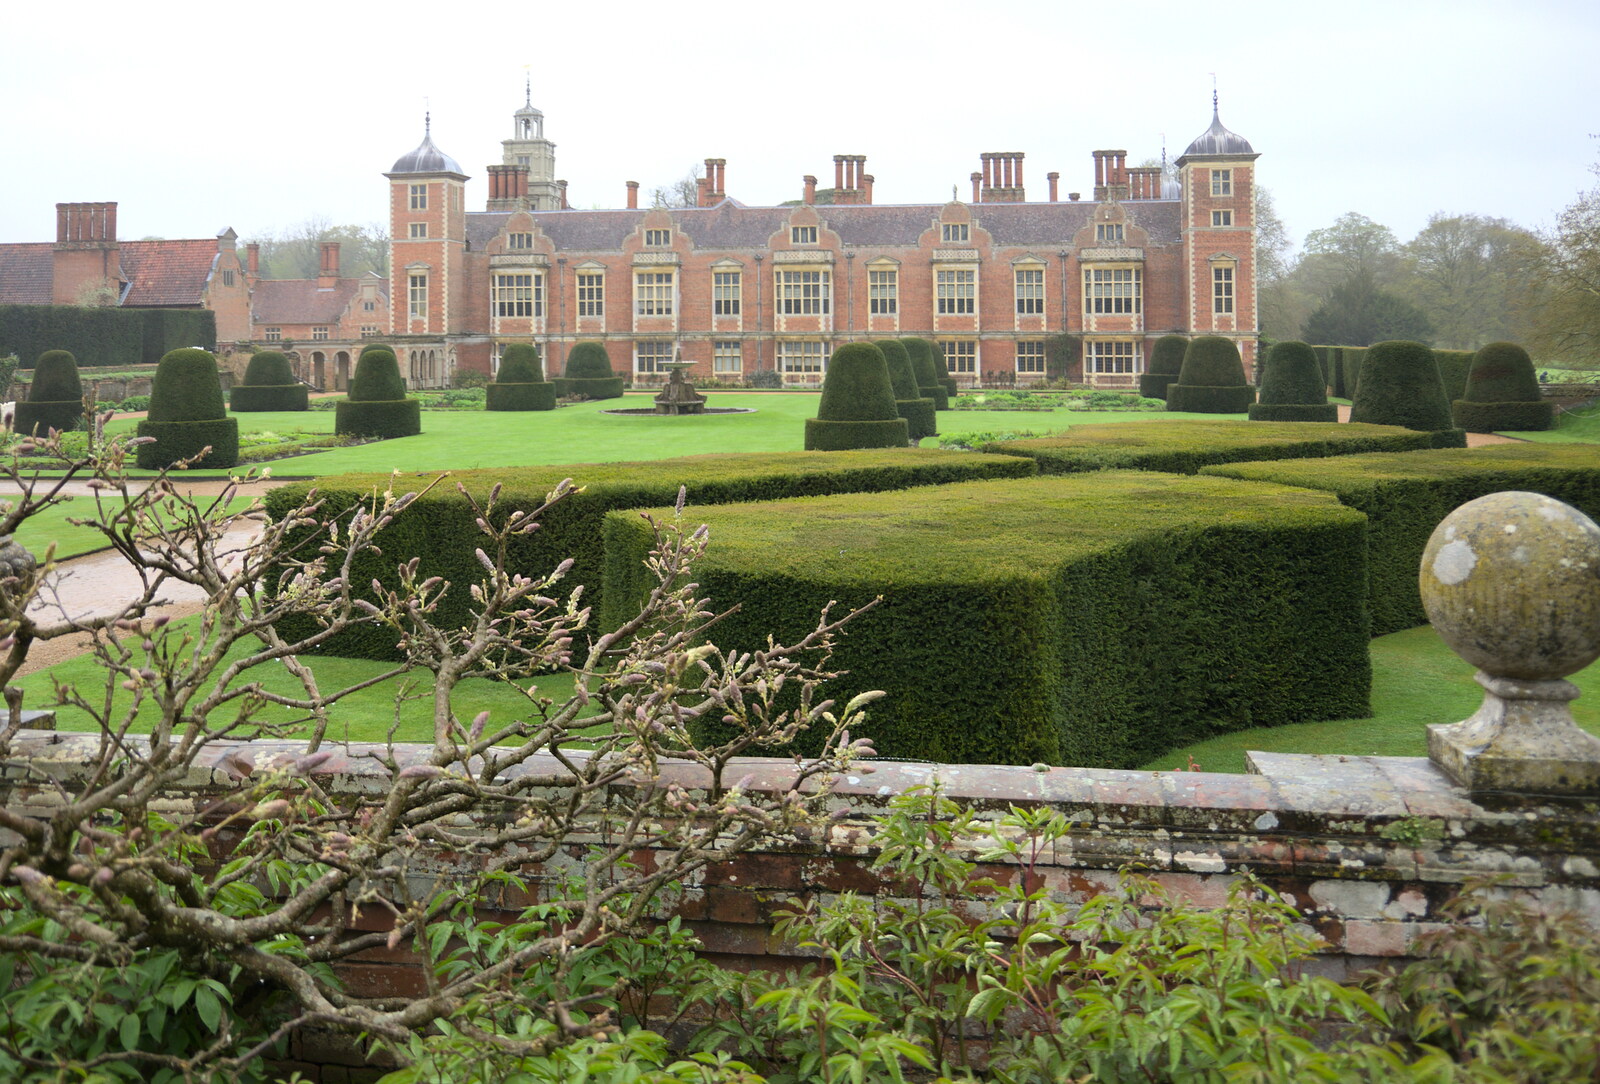 Blickling's impressive topiary from A Trip to Blickling Hall, Aylsham, Norfolk - 29th April 2018